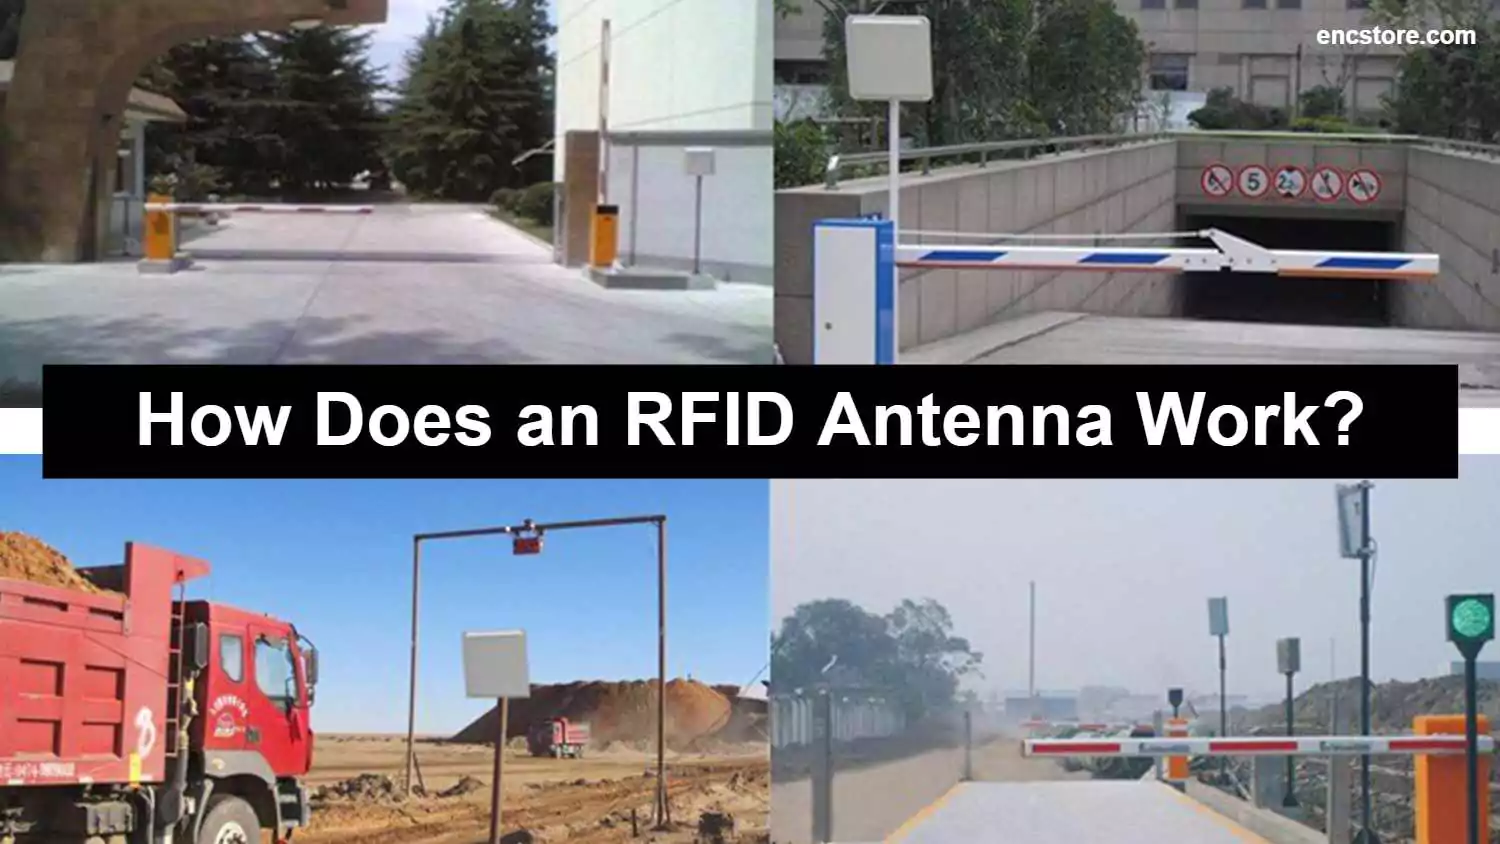 How Does an RFID Antenna Work